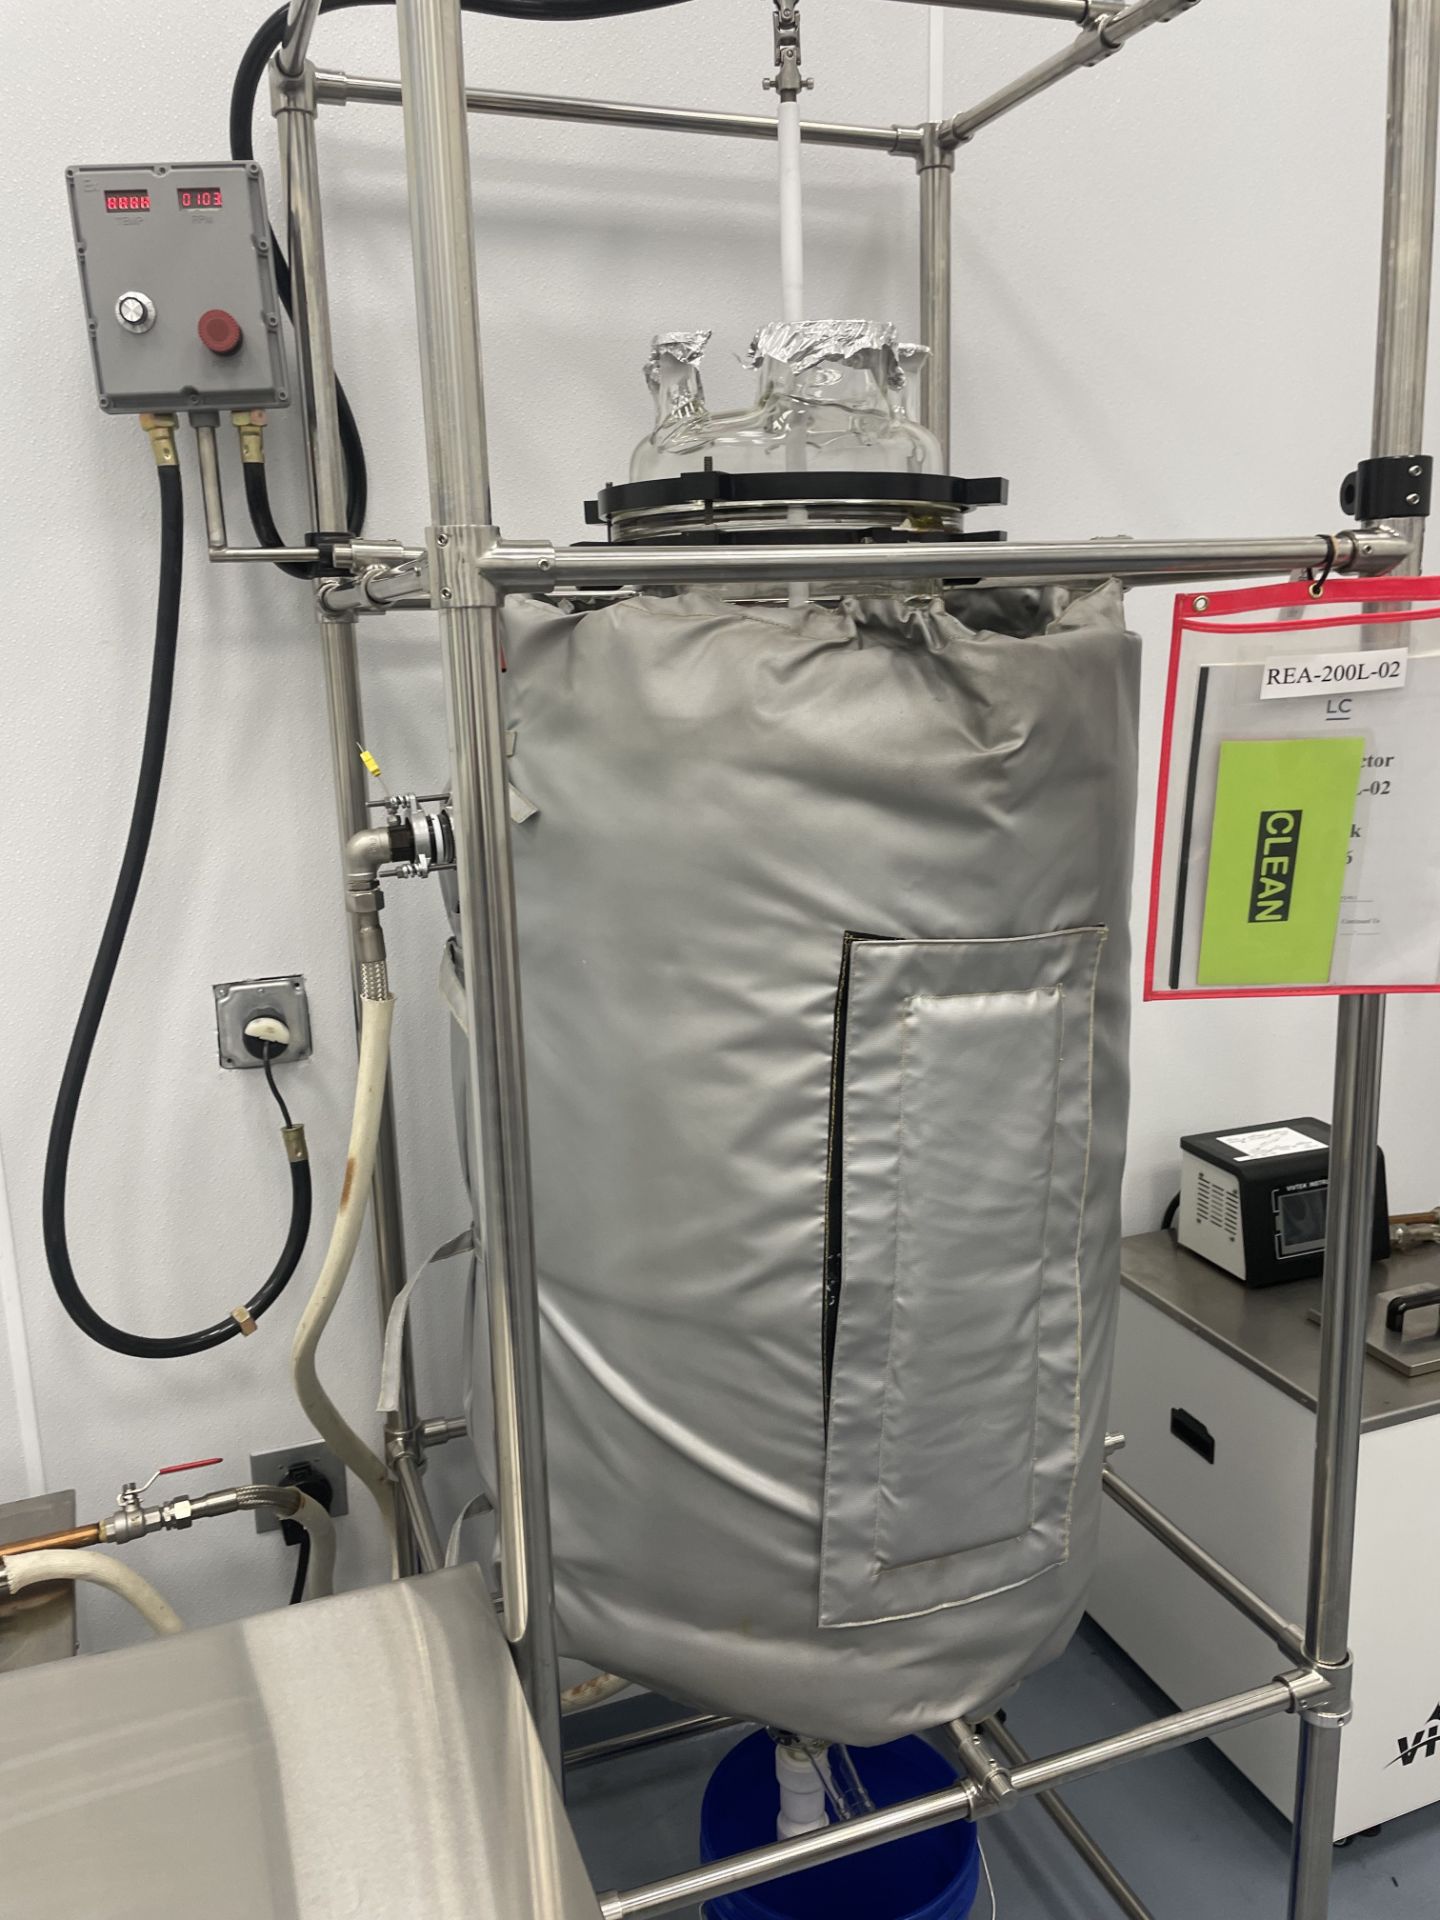 Used 200 L Agitated Jacketed Glass Reactor with Vivtek Chilling/ Heating Unit. - Image 2 of 11